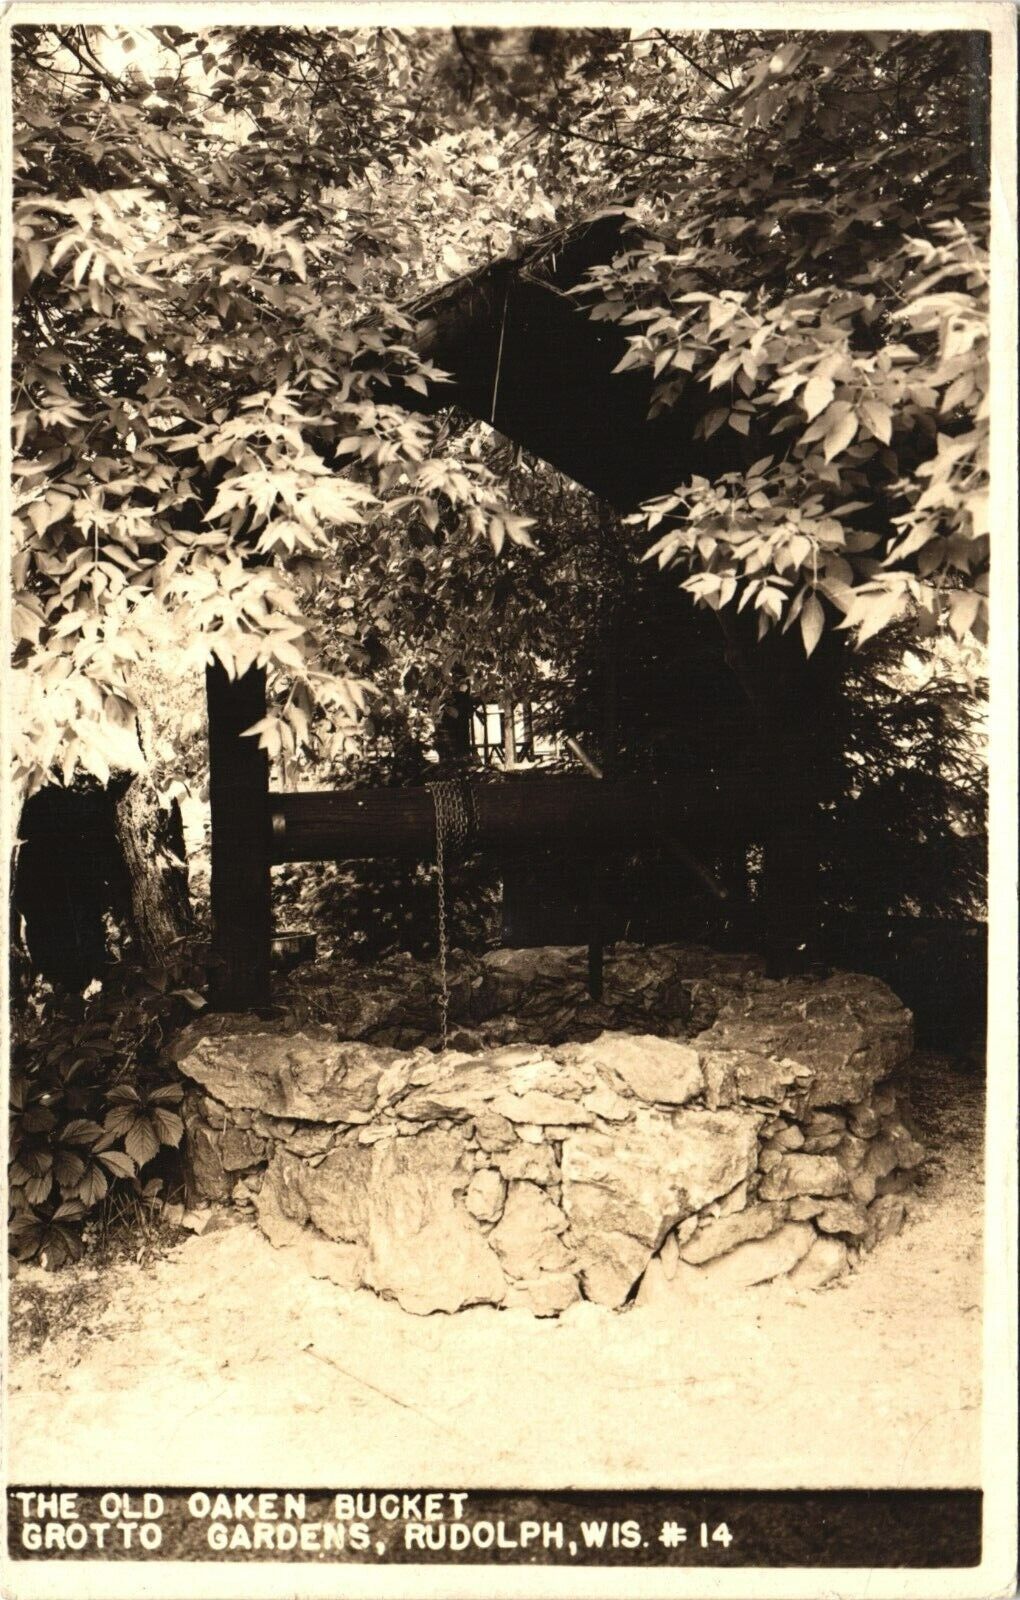 GROTTO GARDENS OLD WELL antique real photo postcard rppc RUDOLPH WISCONSIN WI